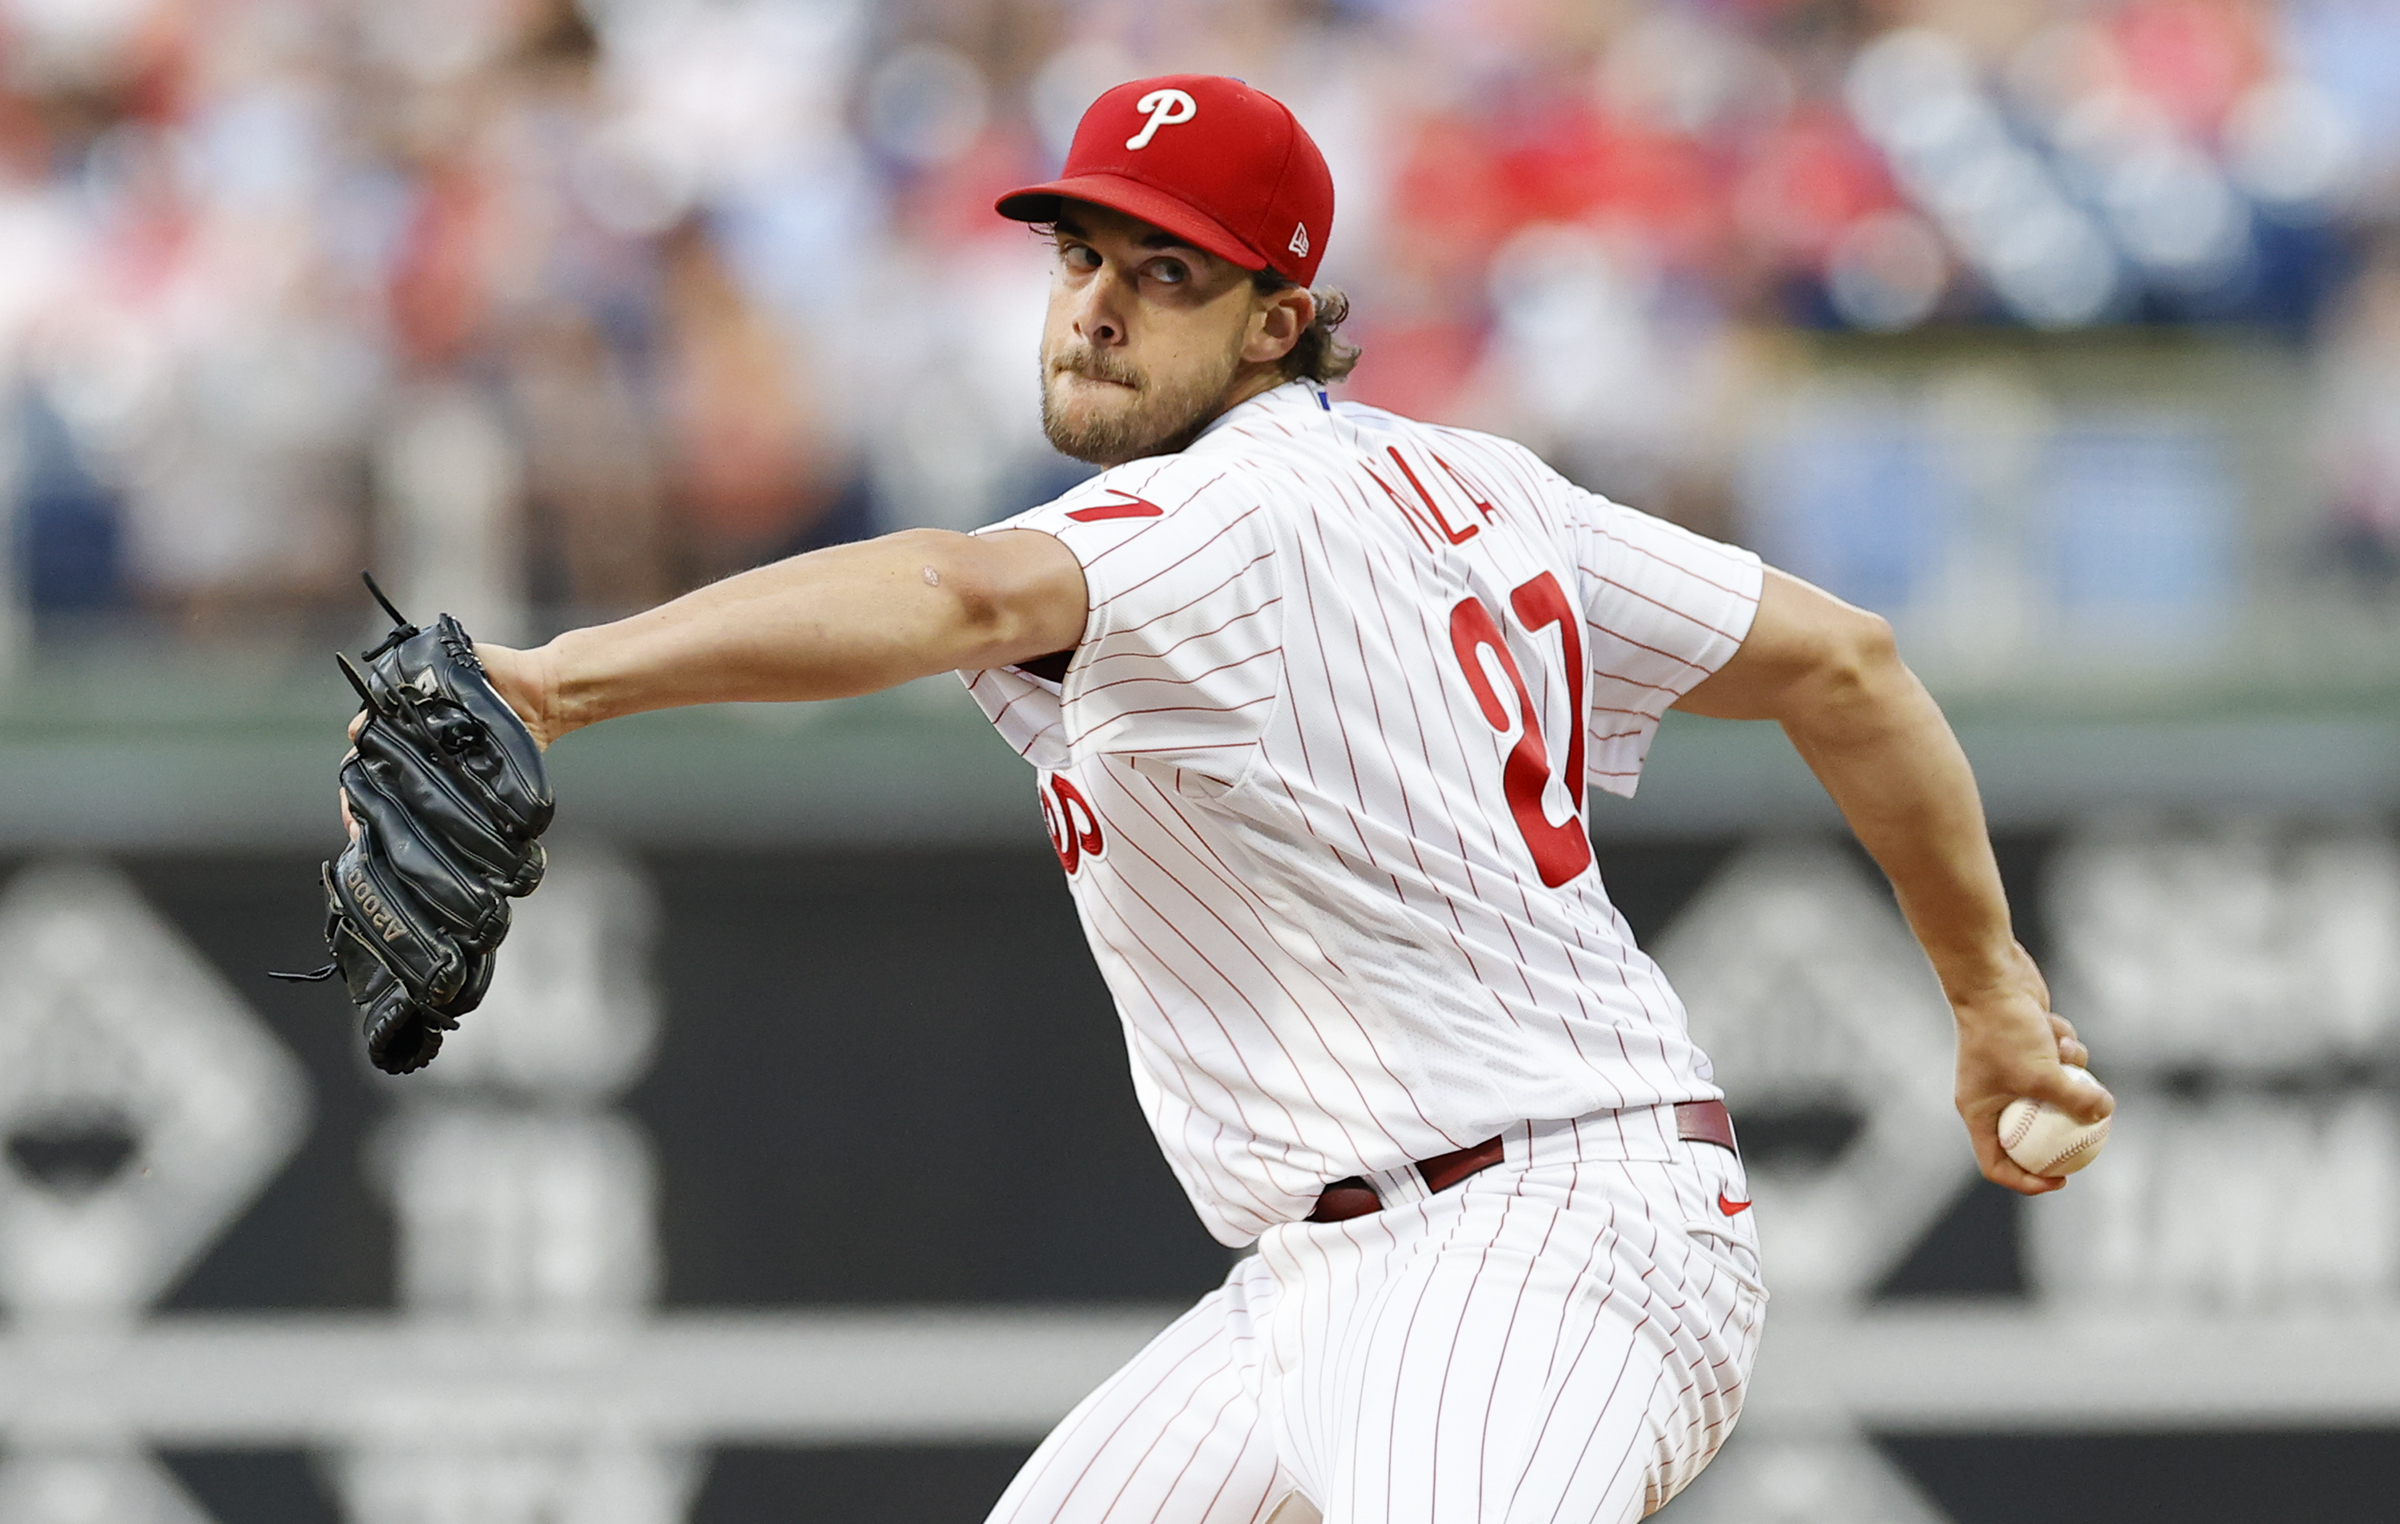 Same Phillies, new era: How Aaron Nola, Rhys Hoskins and Bryce Harper  emphatically turned the page in Game 3 win